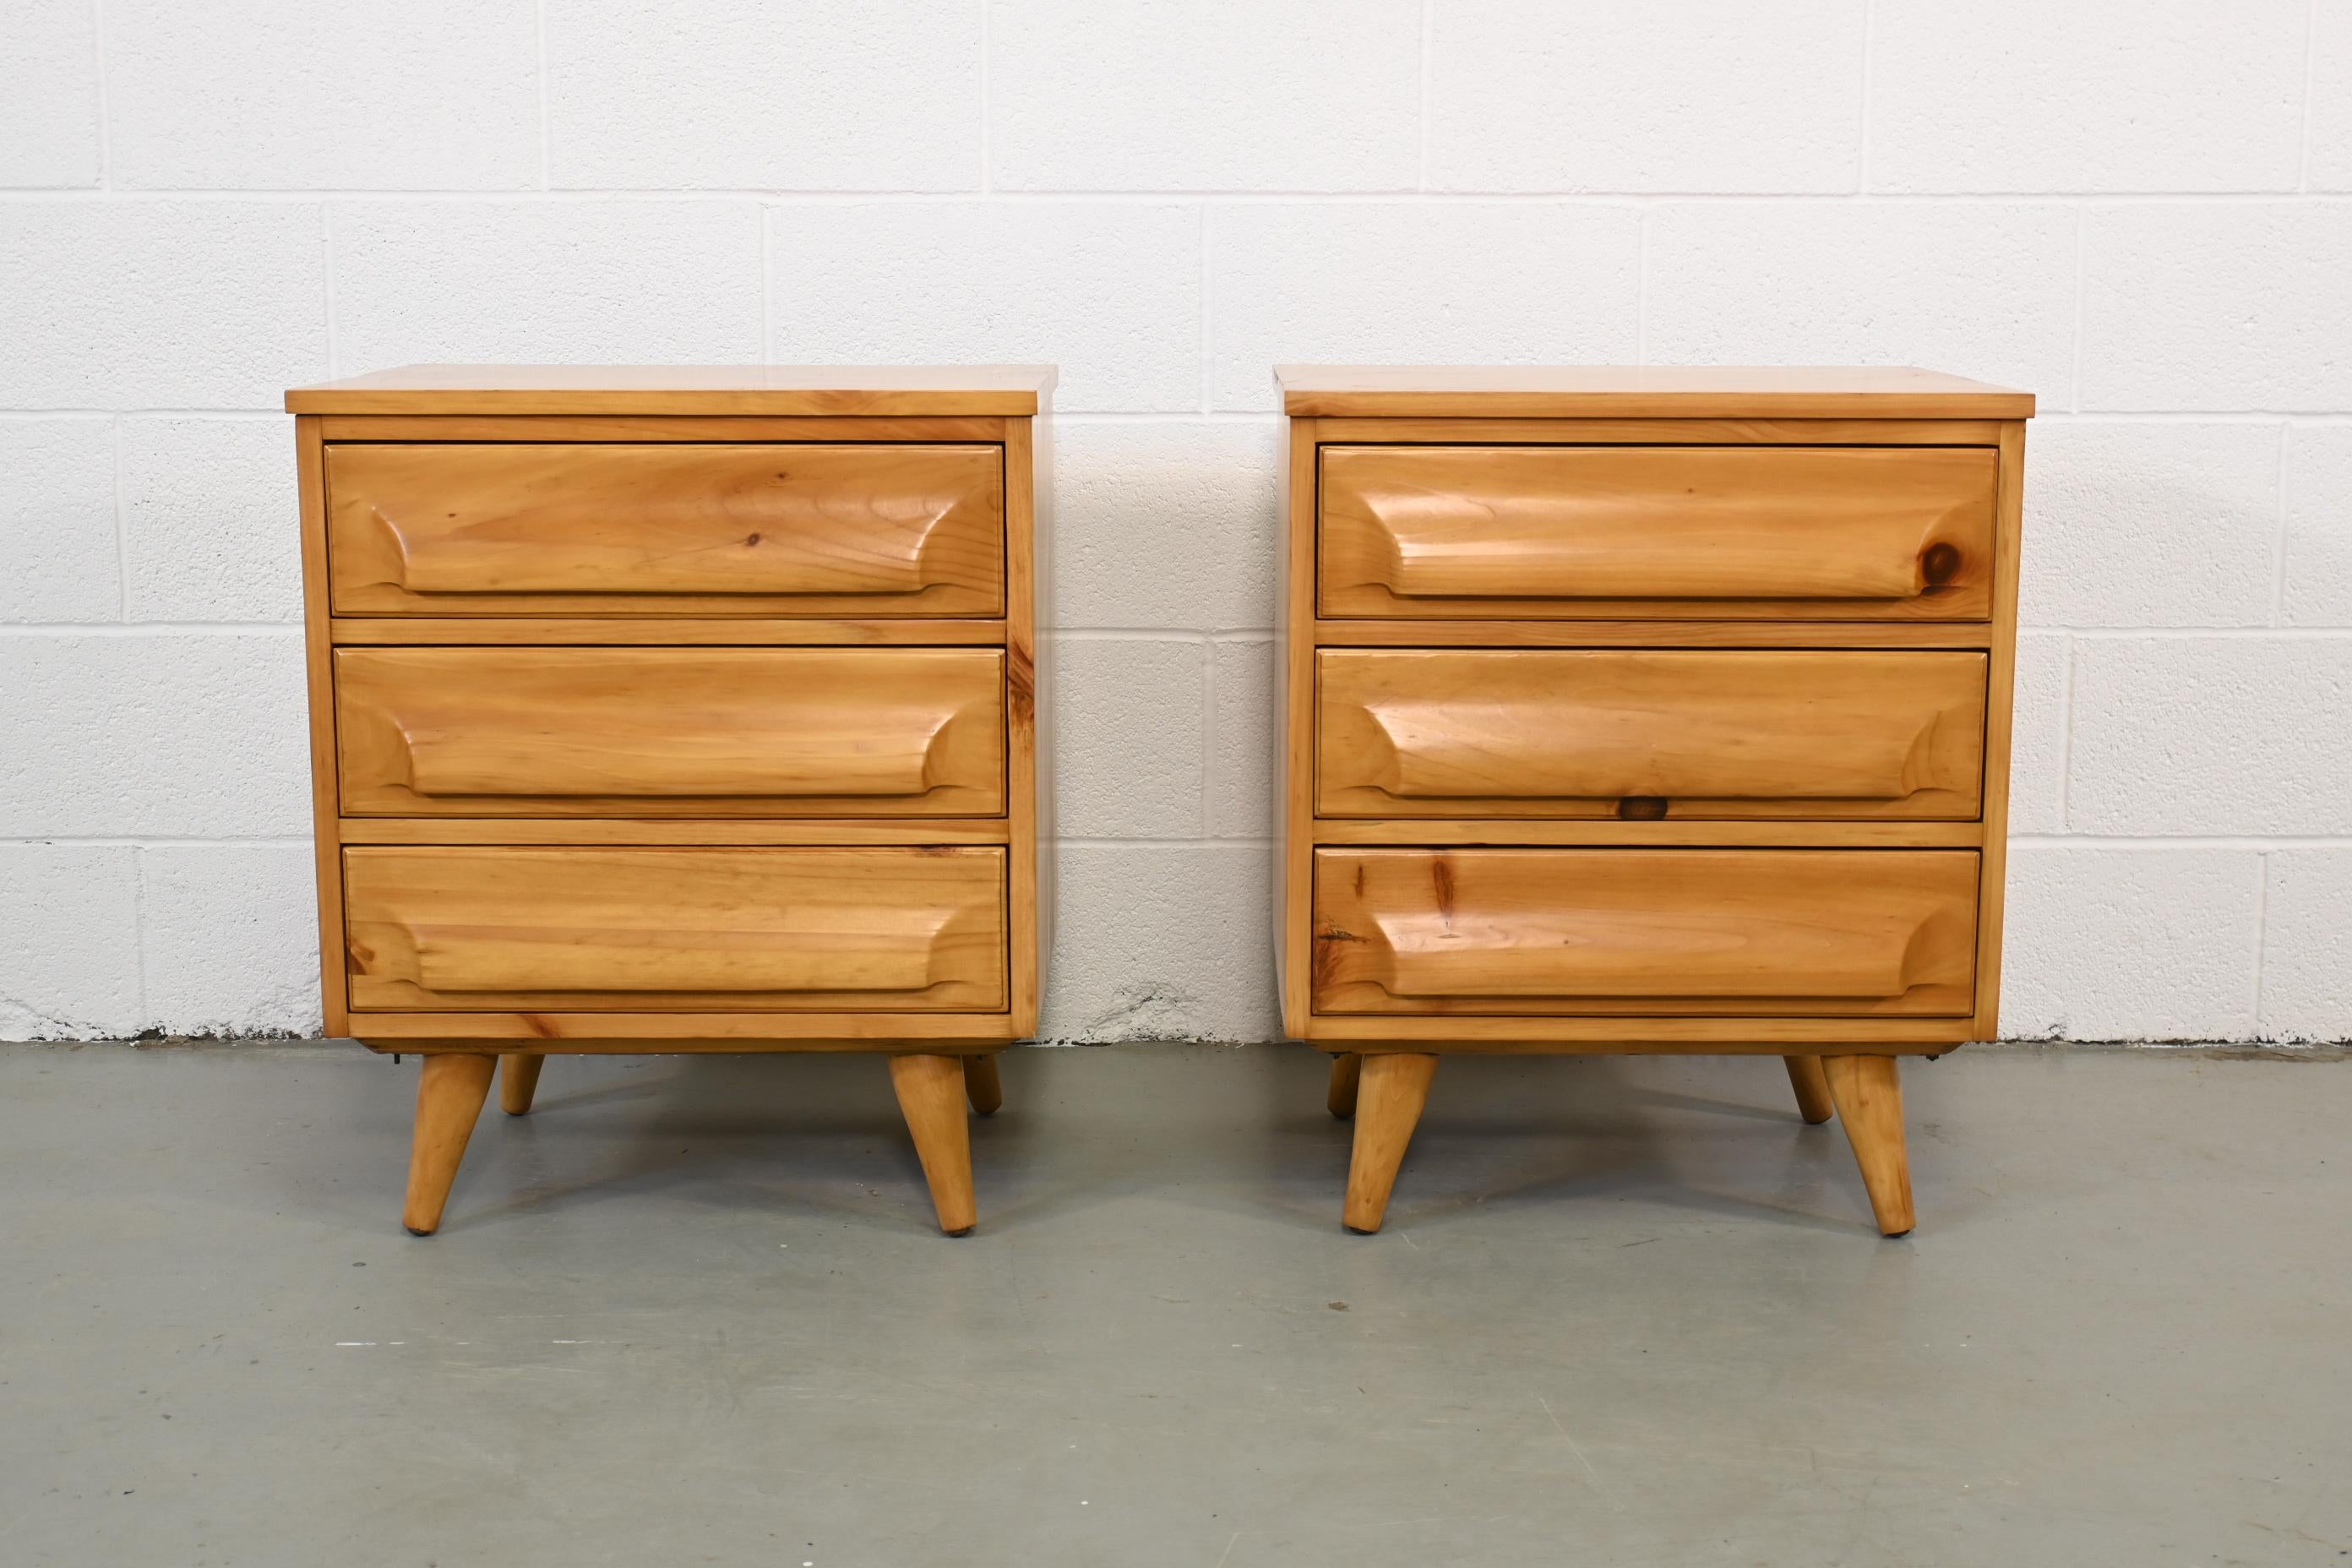 Franklin Shockey sculpted pine nightstands

Franklin Shockey, USA, 1960s

Measures: 22 Wide x 17.38 Deep x 26.25 High

Sculpted pine three drawer nightstands

Professionally Refinished. Excellent condition with minor wear from age.